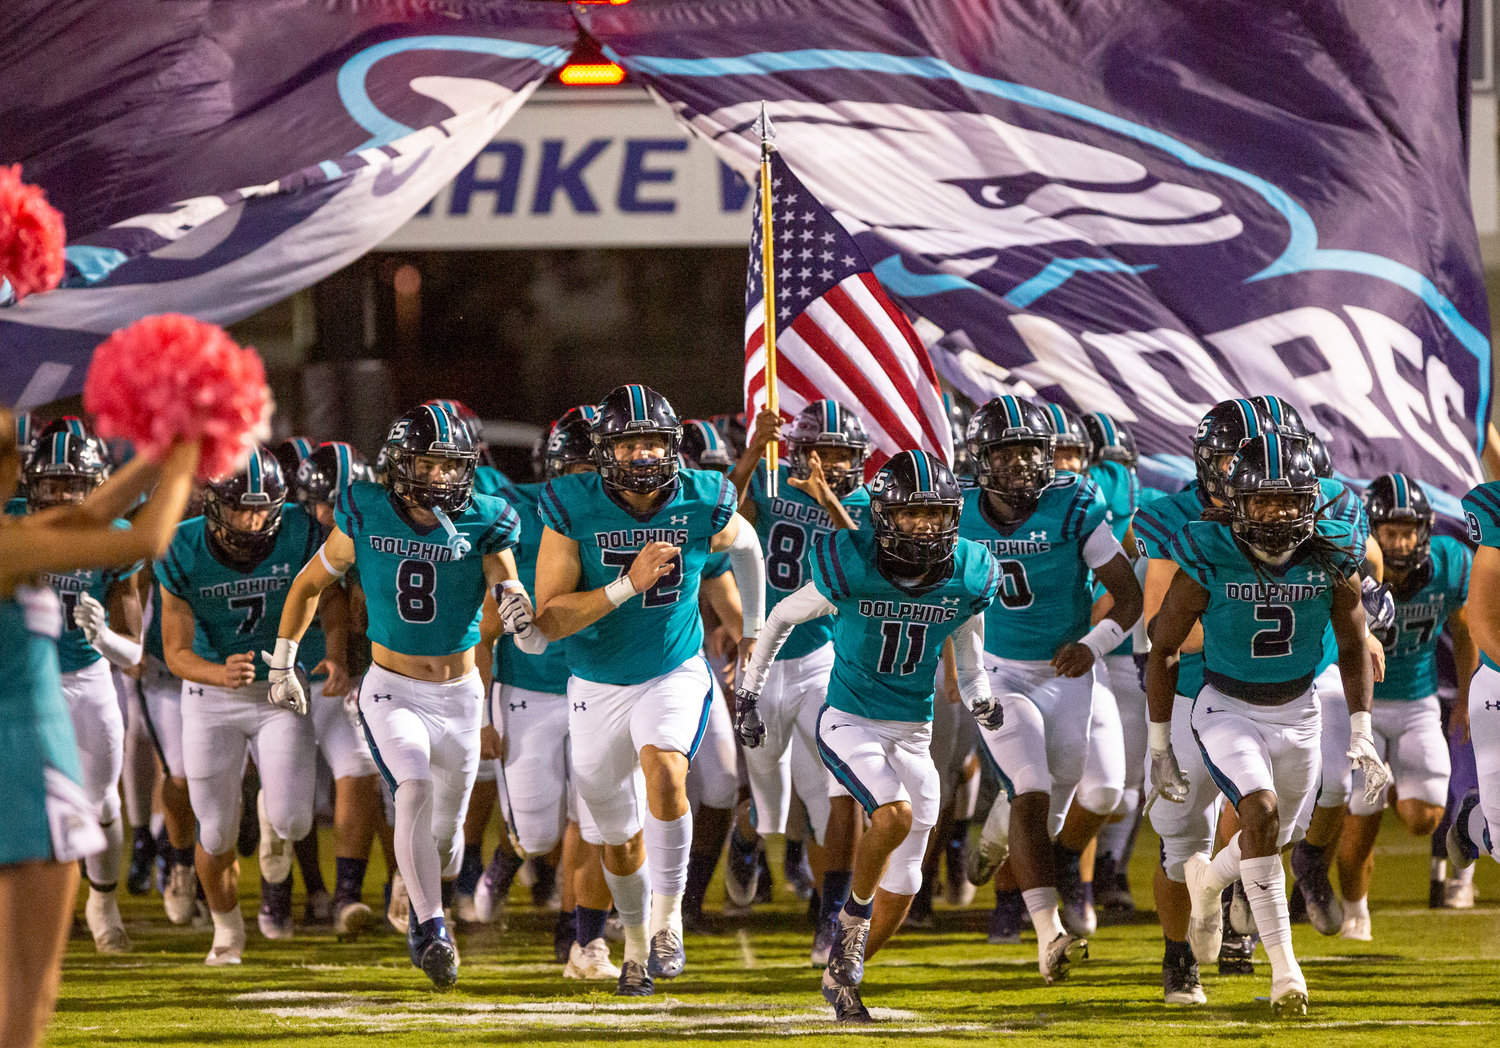 The Gulf Shores Dolphins take the field for their Class 5A Region 1 contest against the Elberta Warriors at the Sportsplex Oct. 6. The sixth-ranked Dolphins hit the road to face B.C. Rain Thursday night to help finalize the playoff teams from the group.